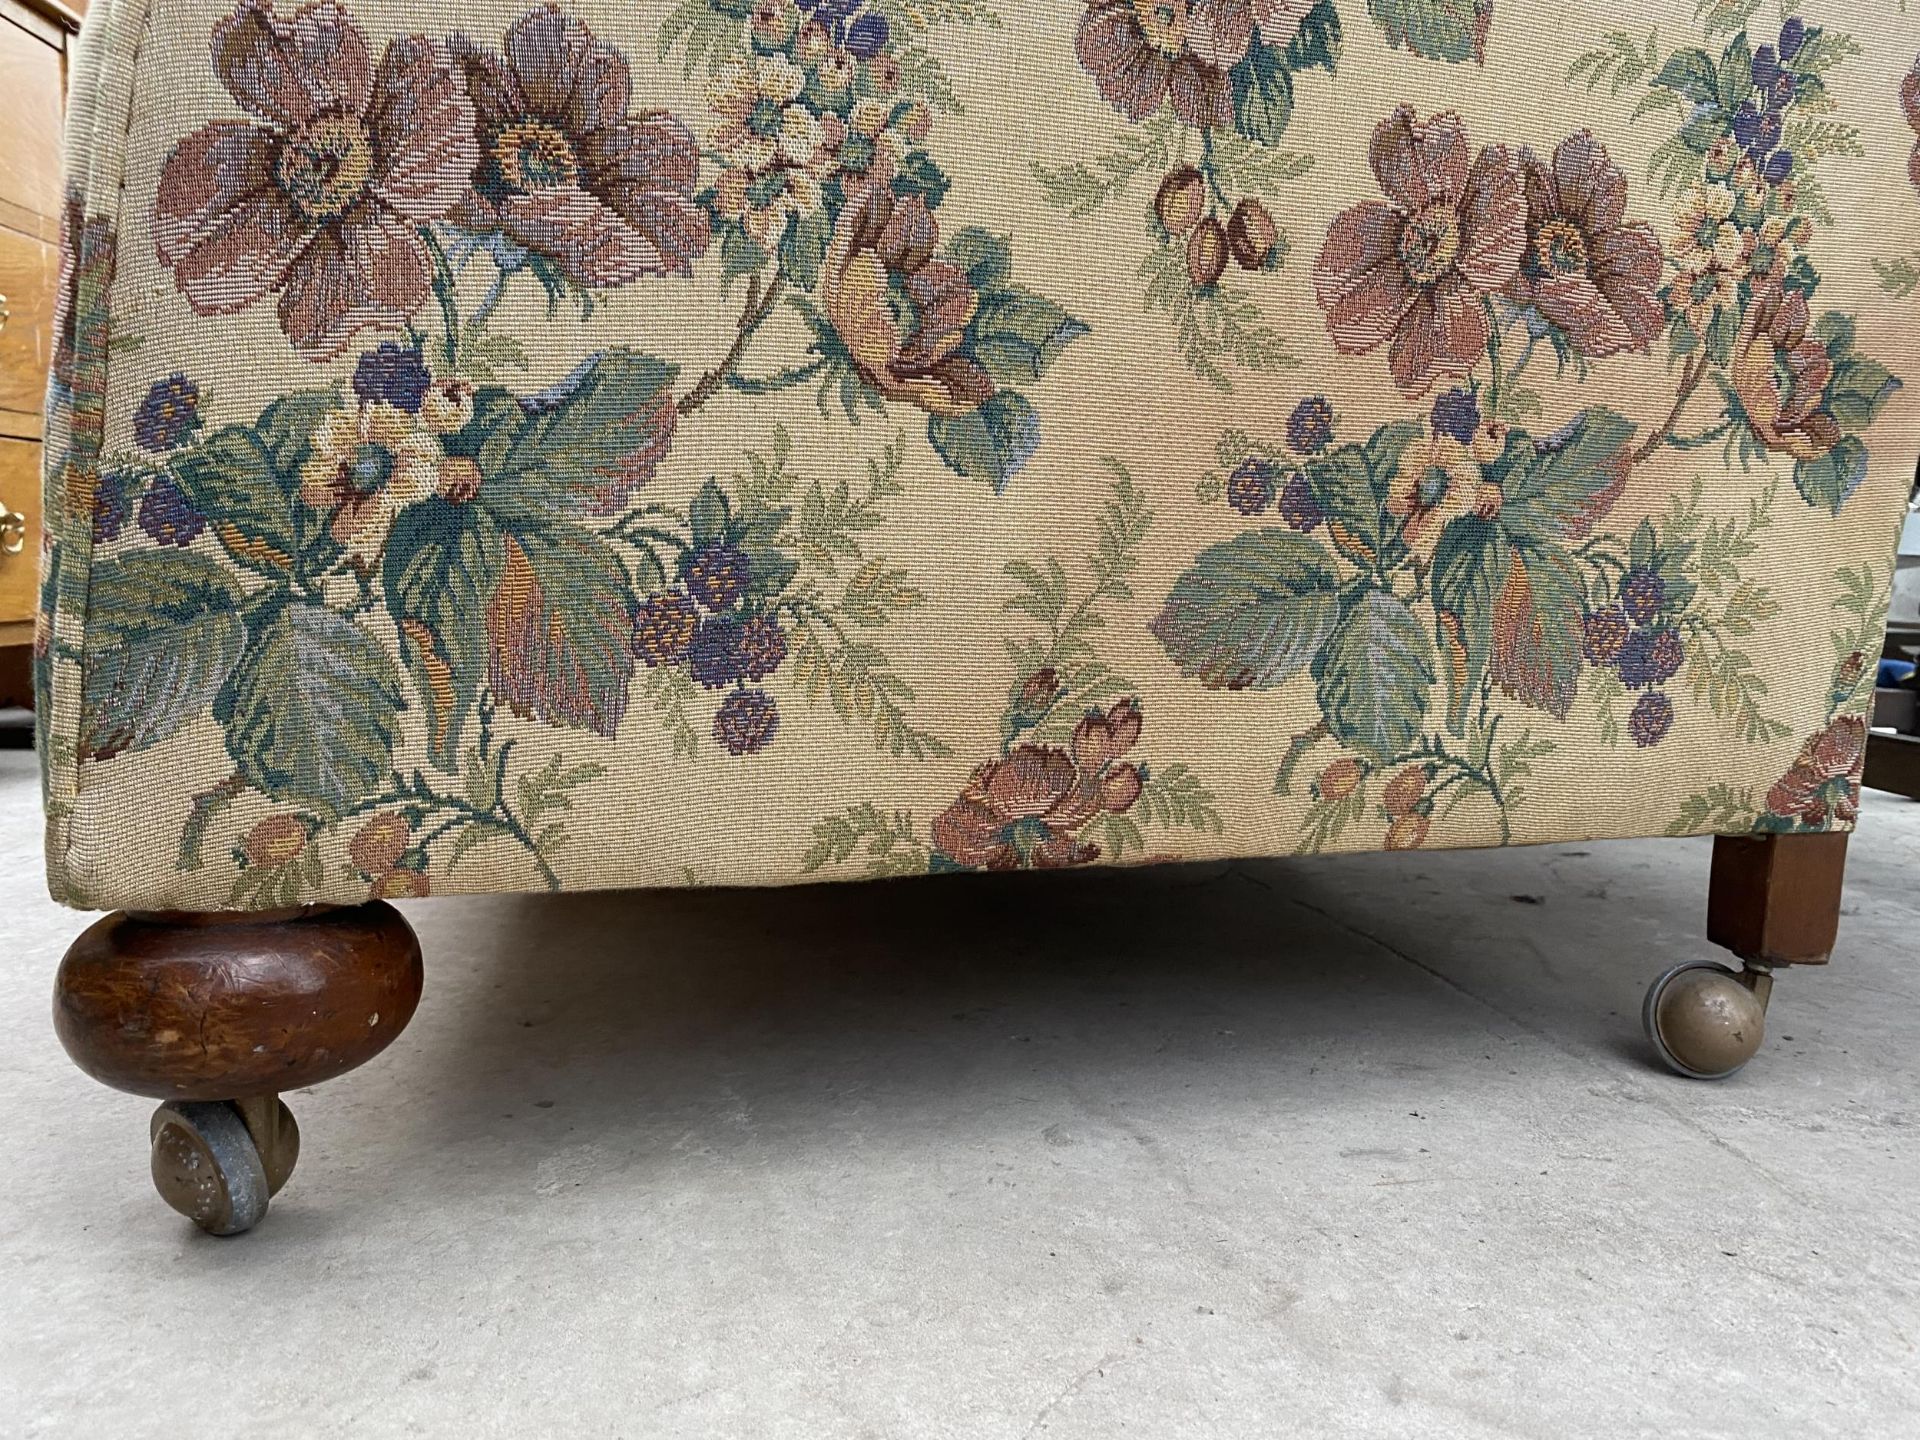 A PAIR OF EARLY 20TH CENTURY SPRUNG AND UPHOLSTERED EASY CHAIRS ON BUN FEET WITH A SPARE LOOSE COVER - Image 2 of 4